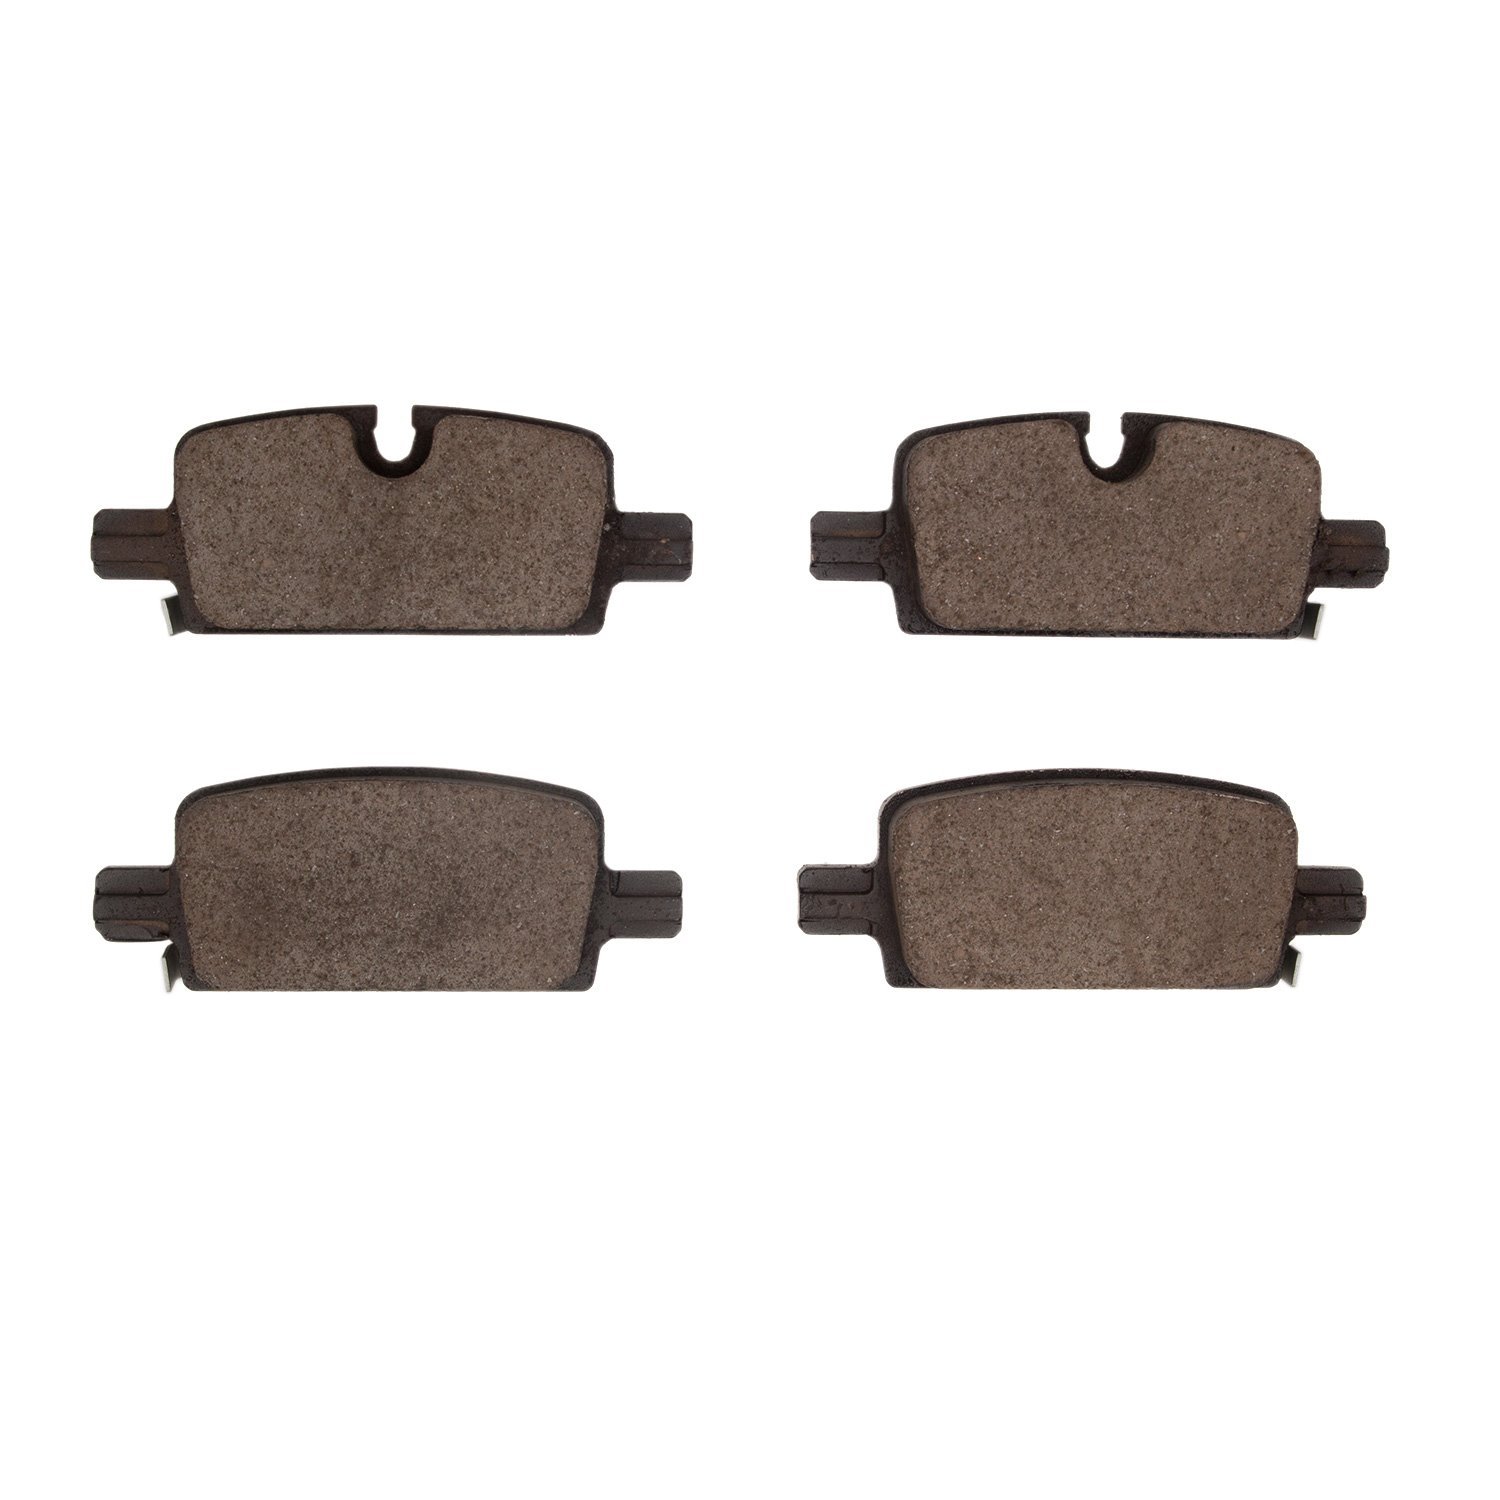 Performance Off-Road/Tow Brake Pads, Fits Select Fits Multiple Makes/Models, Position: Rear Right